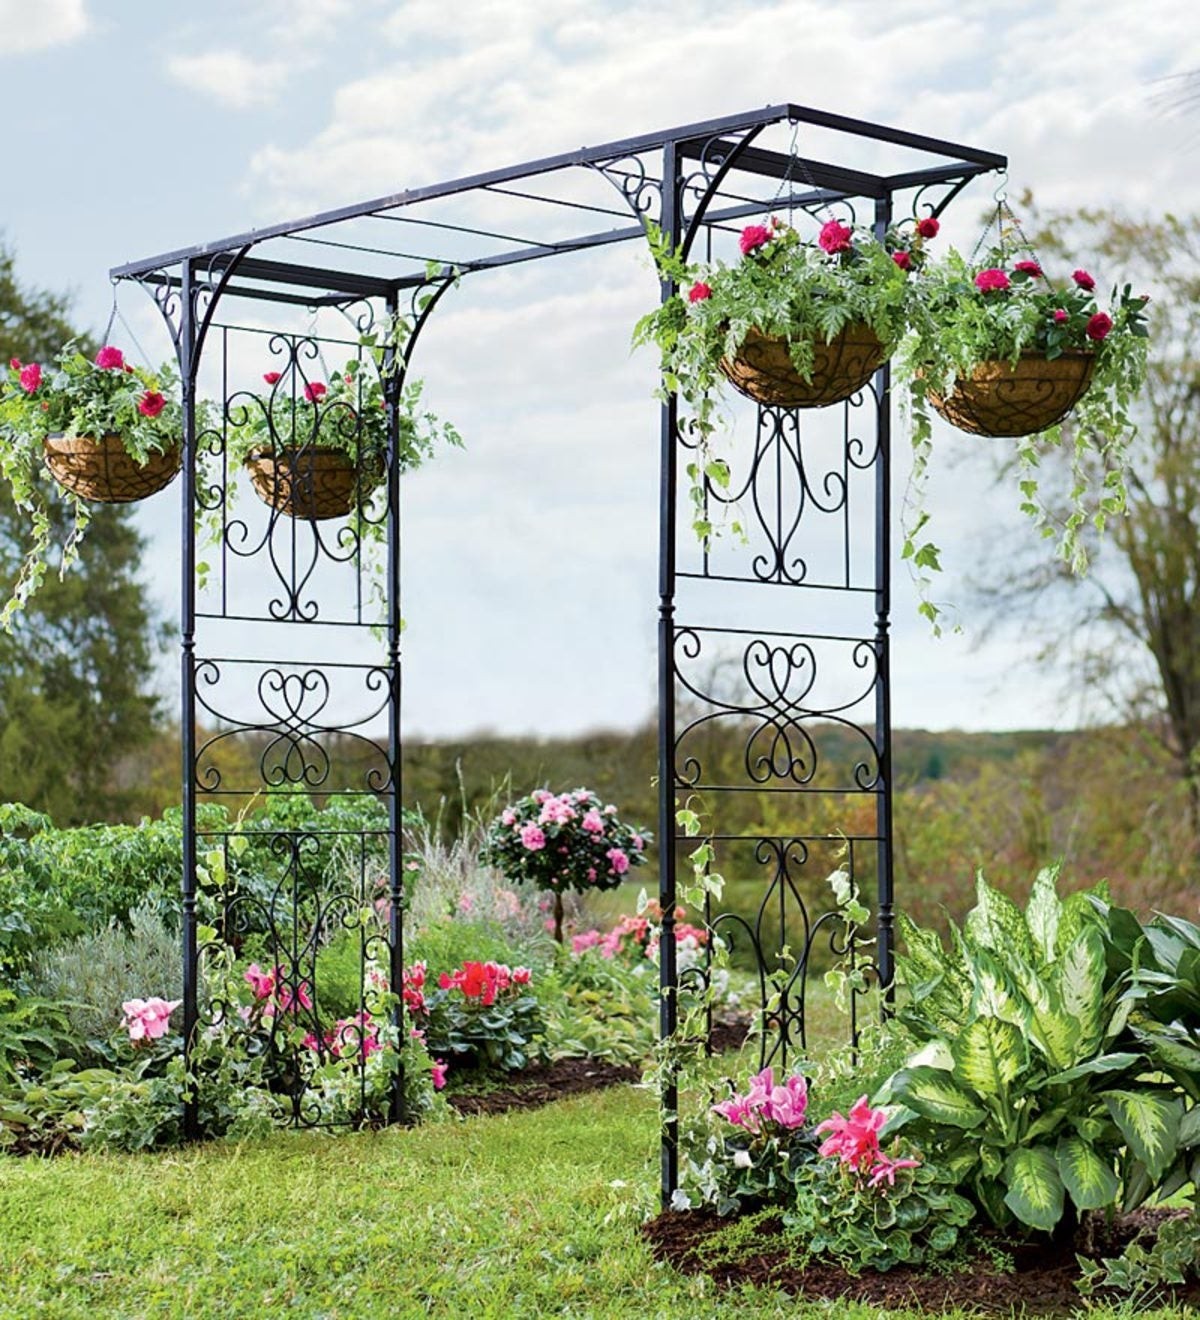 Plow & Hearth Oversized Grand Garden Metal Arbor With Scrollwork - Powder Coated Wrought Iron - Black - 86"L x 24"W x 81"H